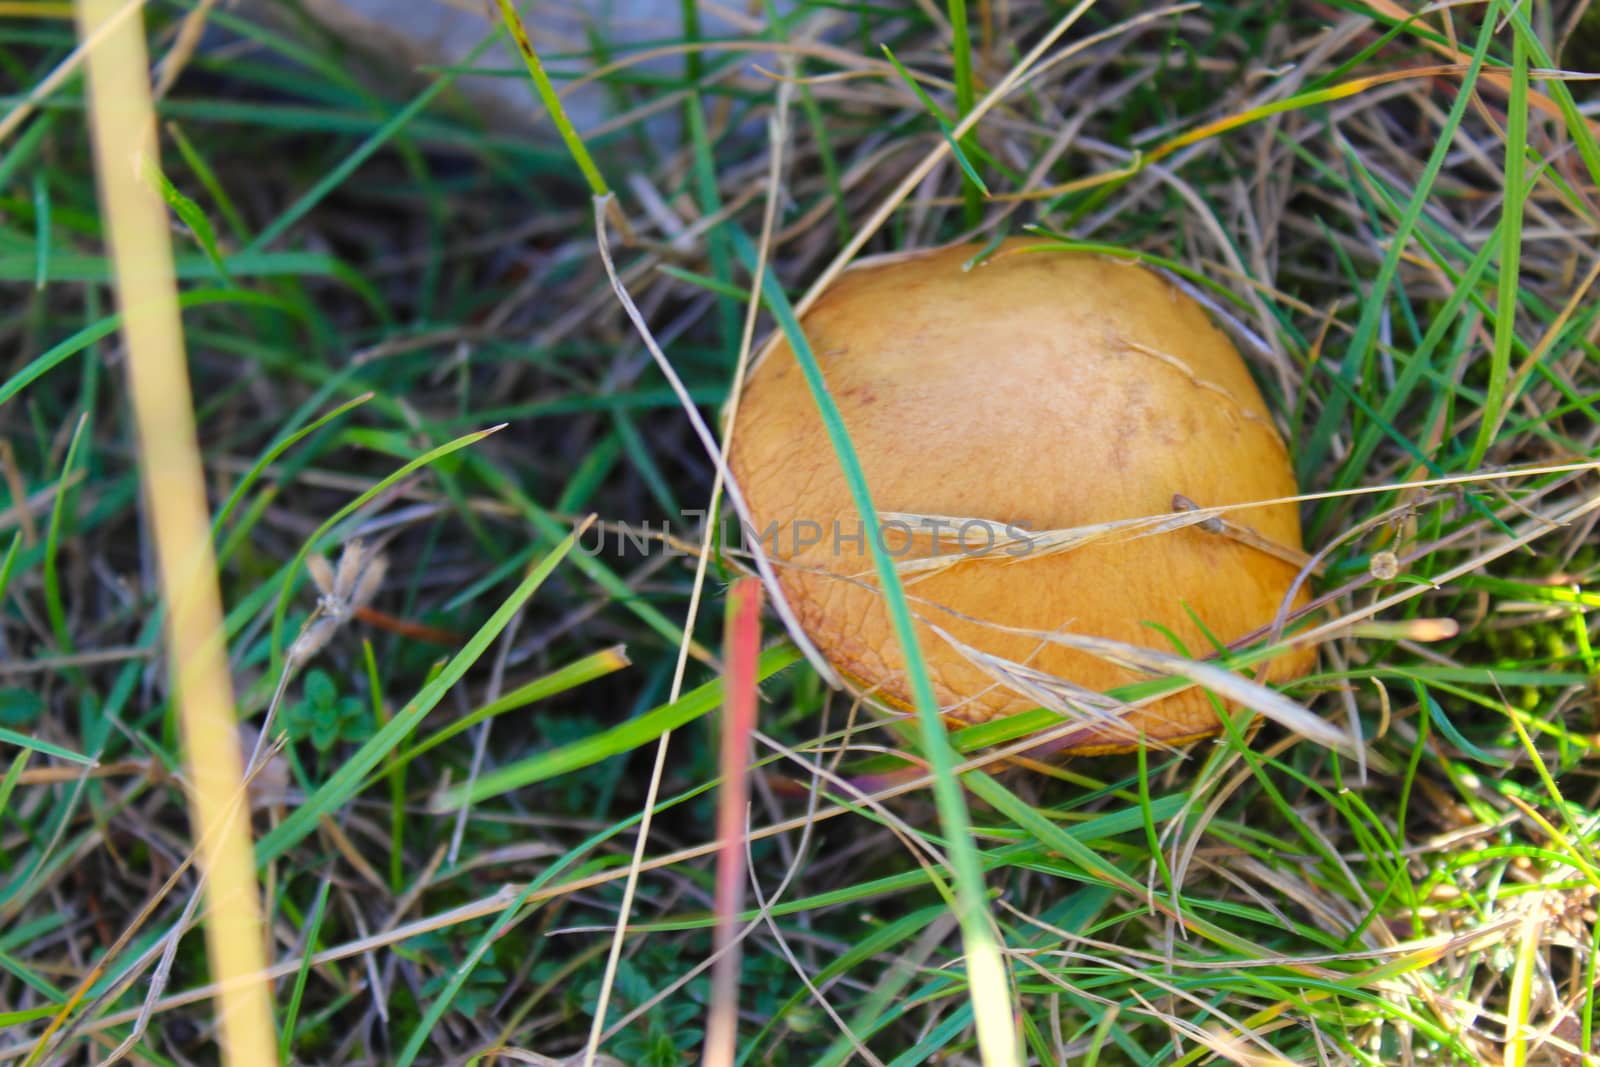 A brown mushroom that grows with grass in the grass. On the mountain Bjelasnica, Bosnia and Herzegovina.